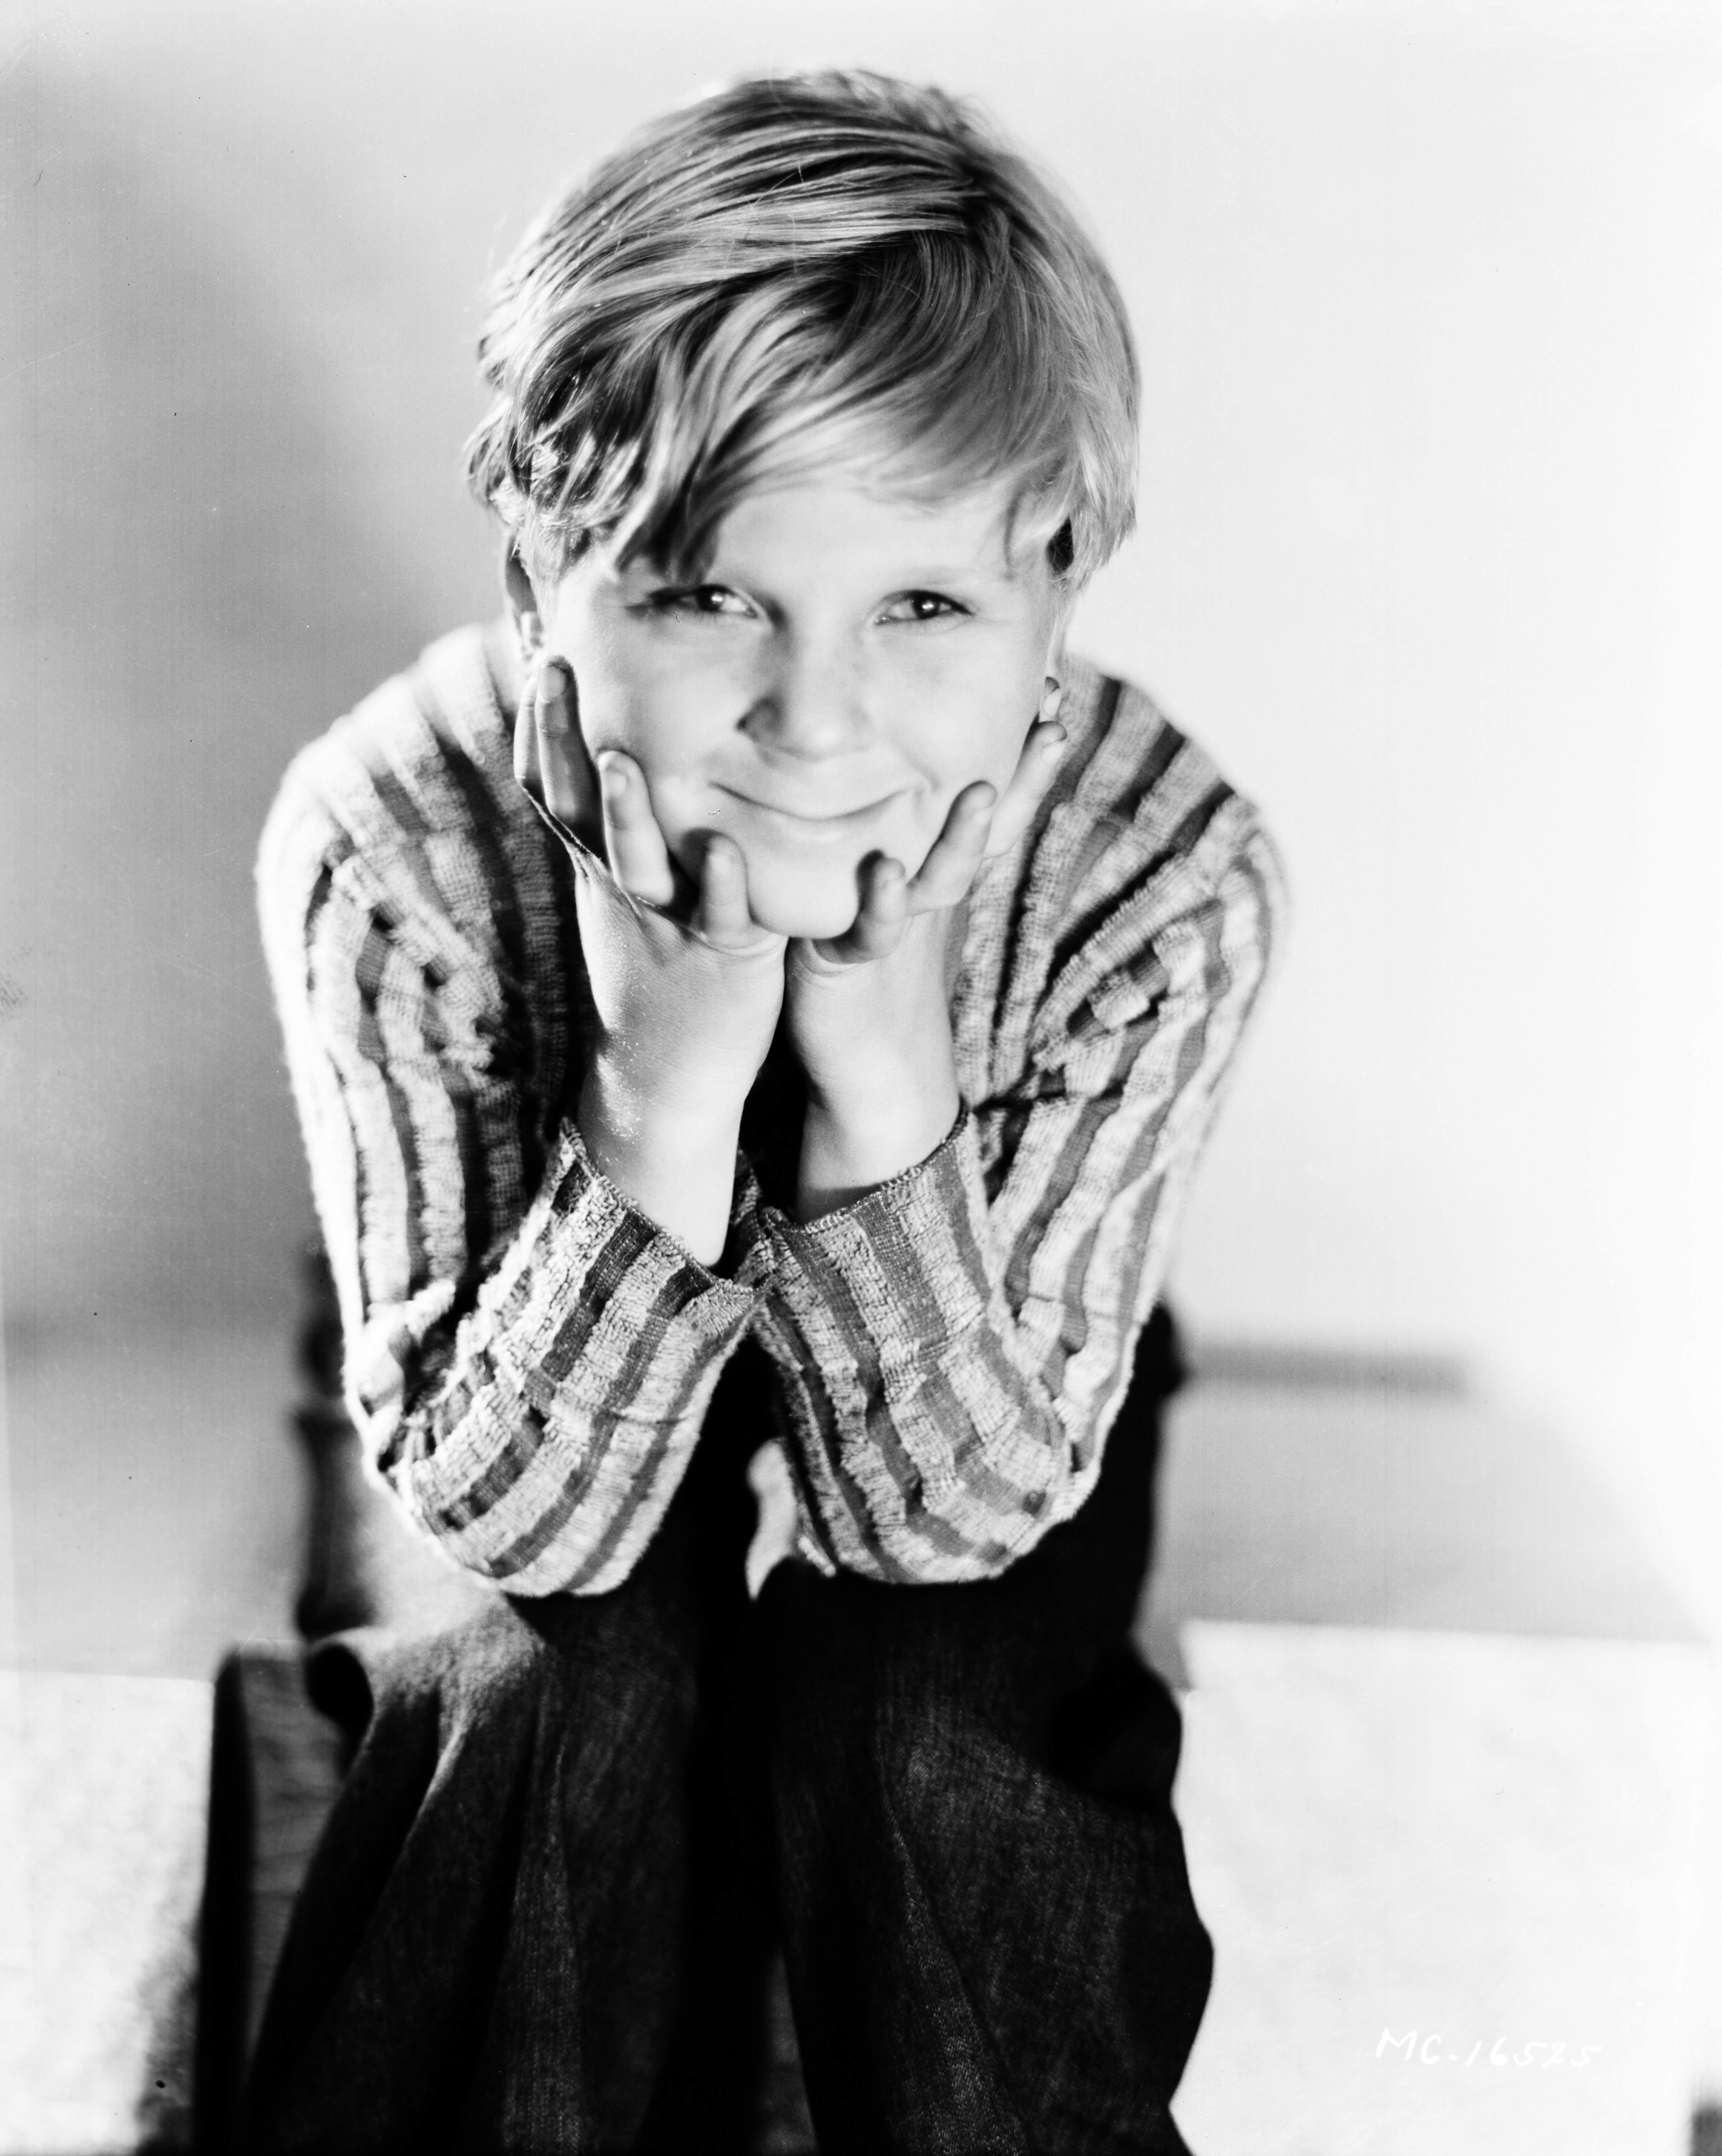 Cooper as a young boy in the late 1920s. | Photo: Getty Images